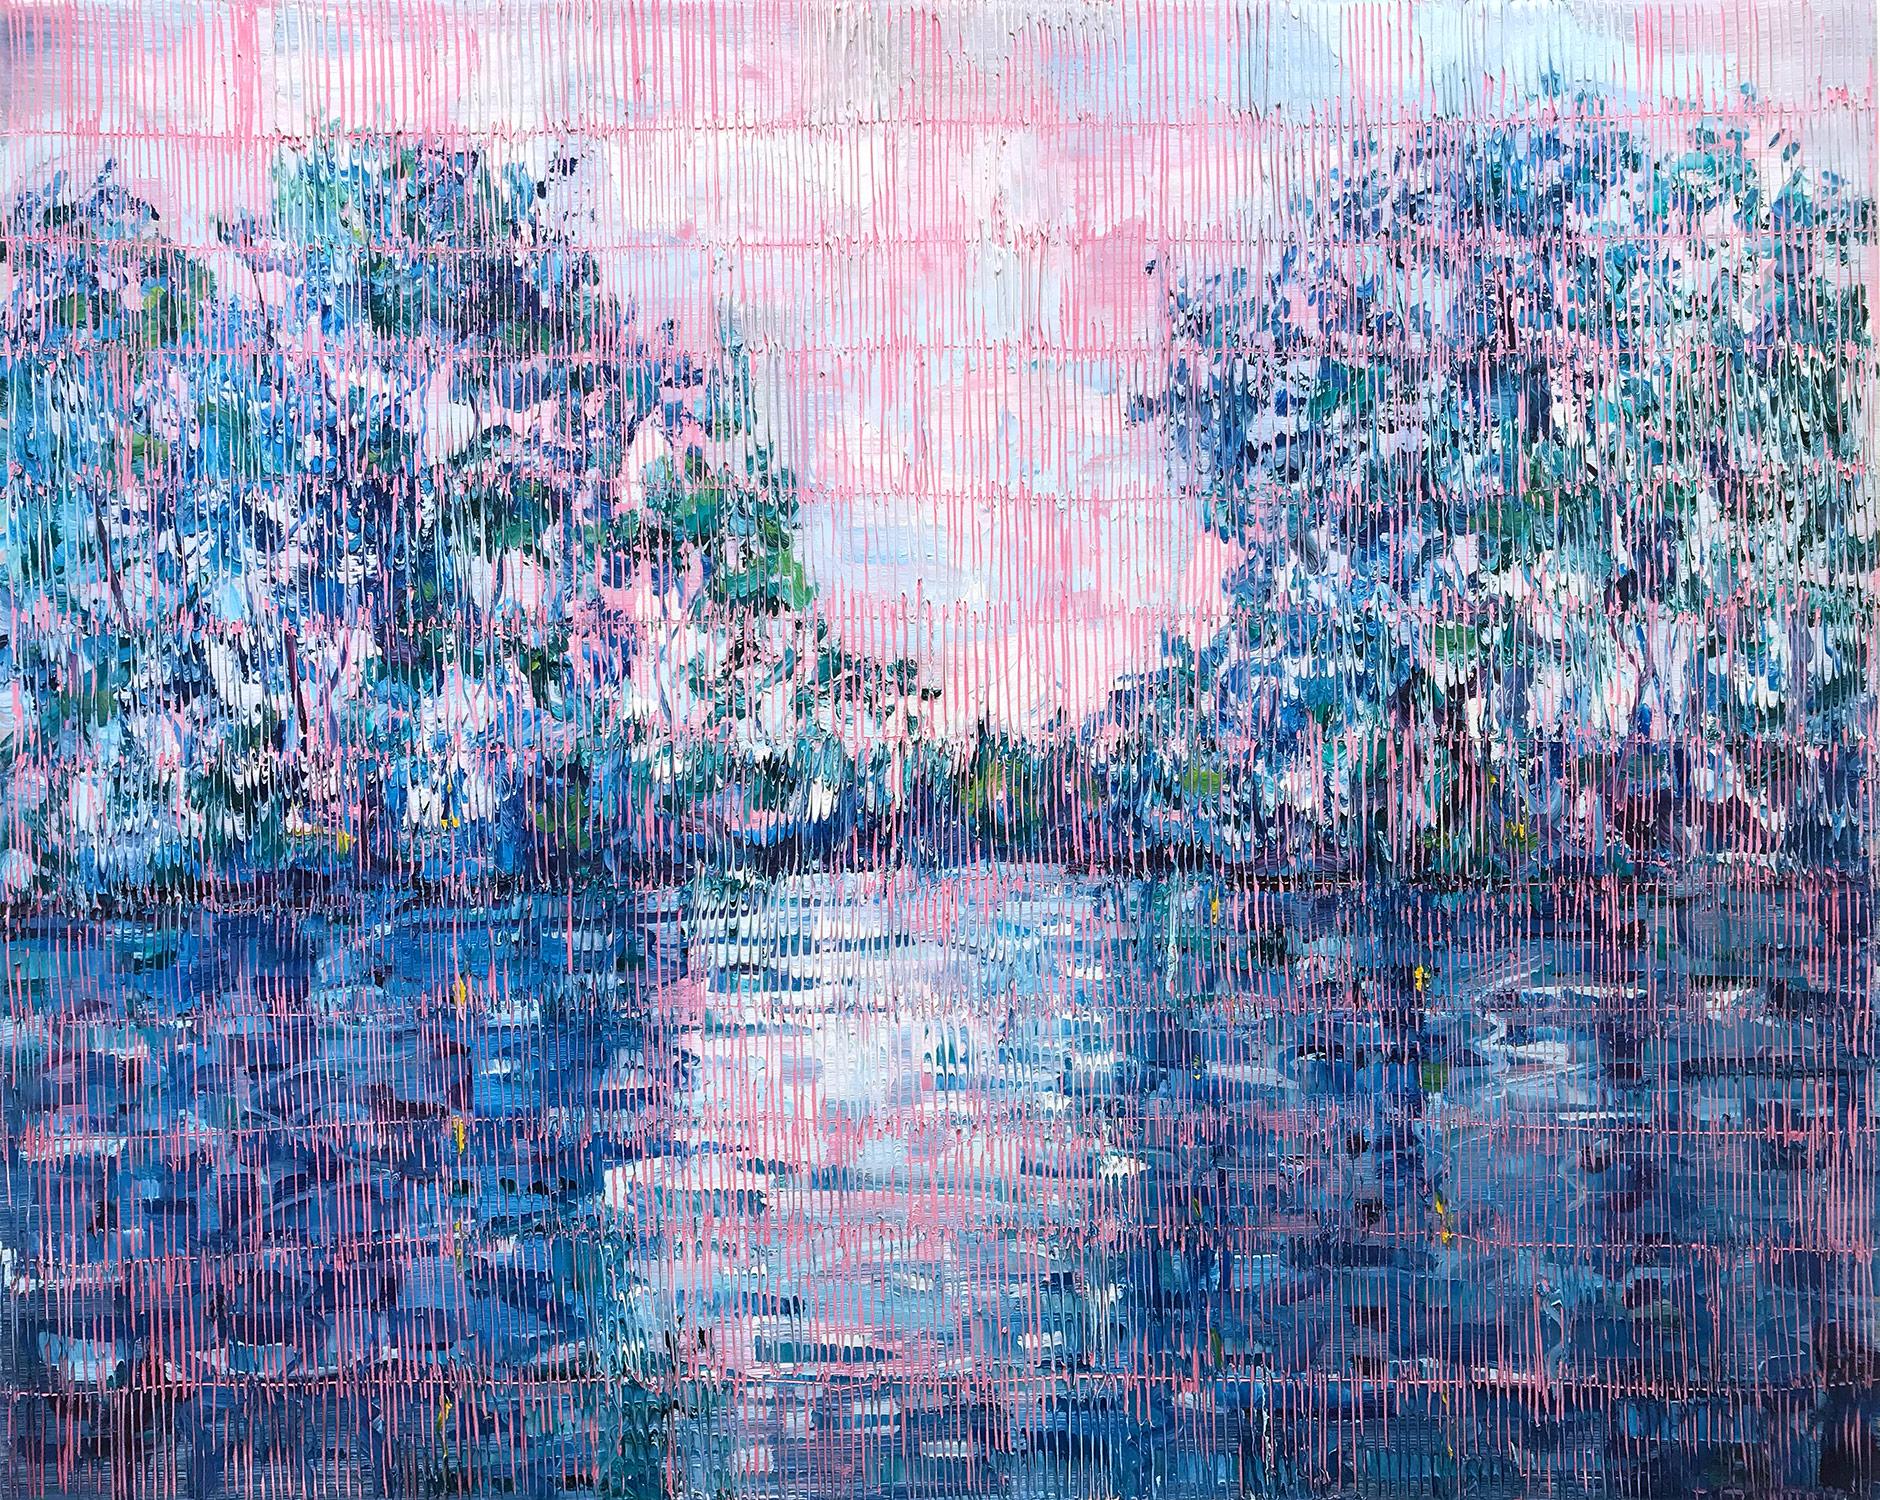 Hunt Slonem Abstract Painting - "Bayou Teche" Blue, Pink and Silver toned Landscape Contemporary Oil Painting